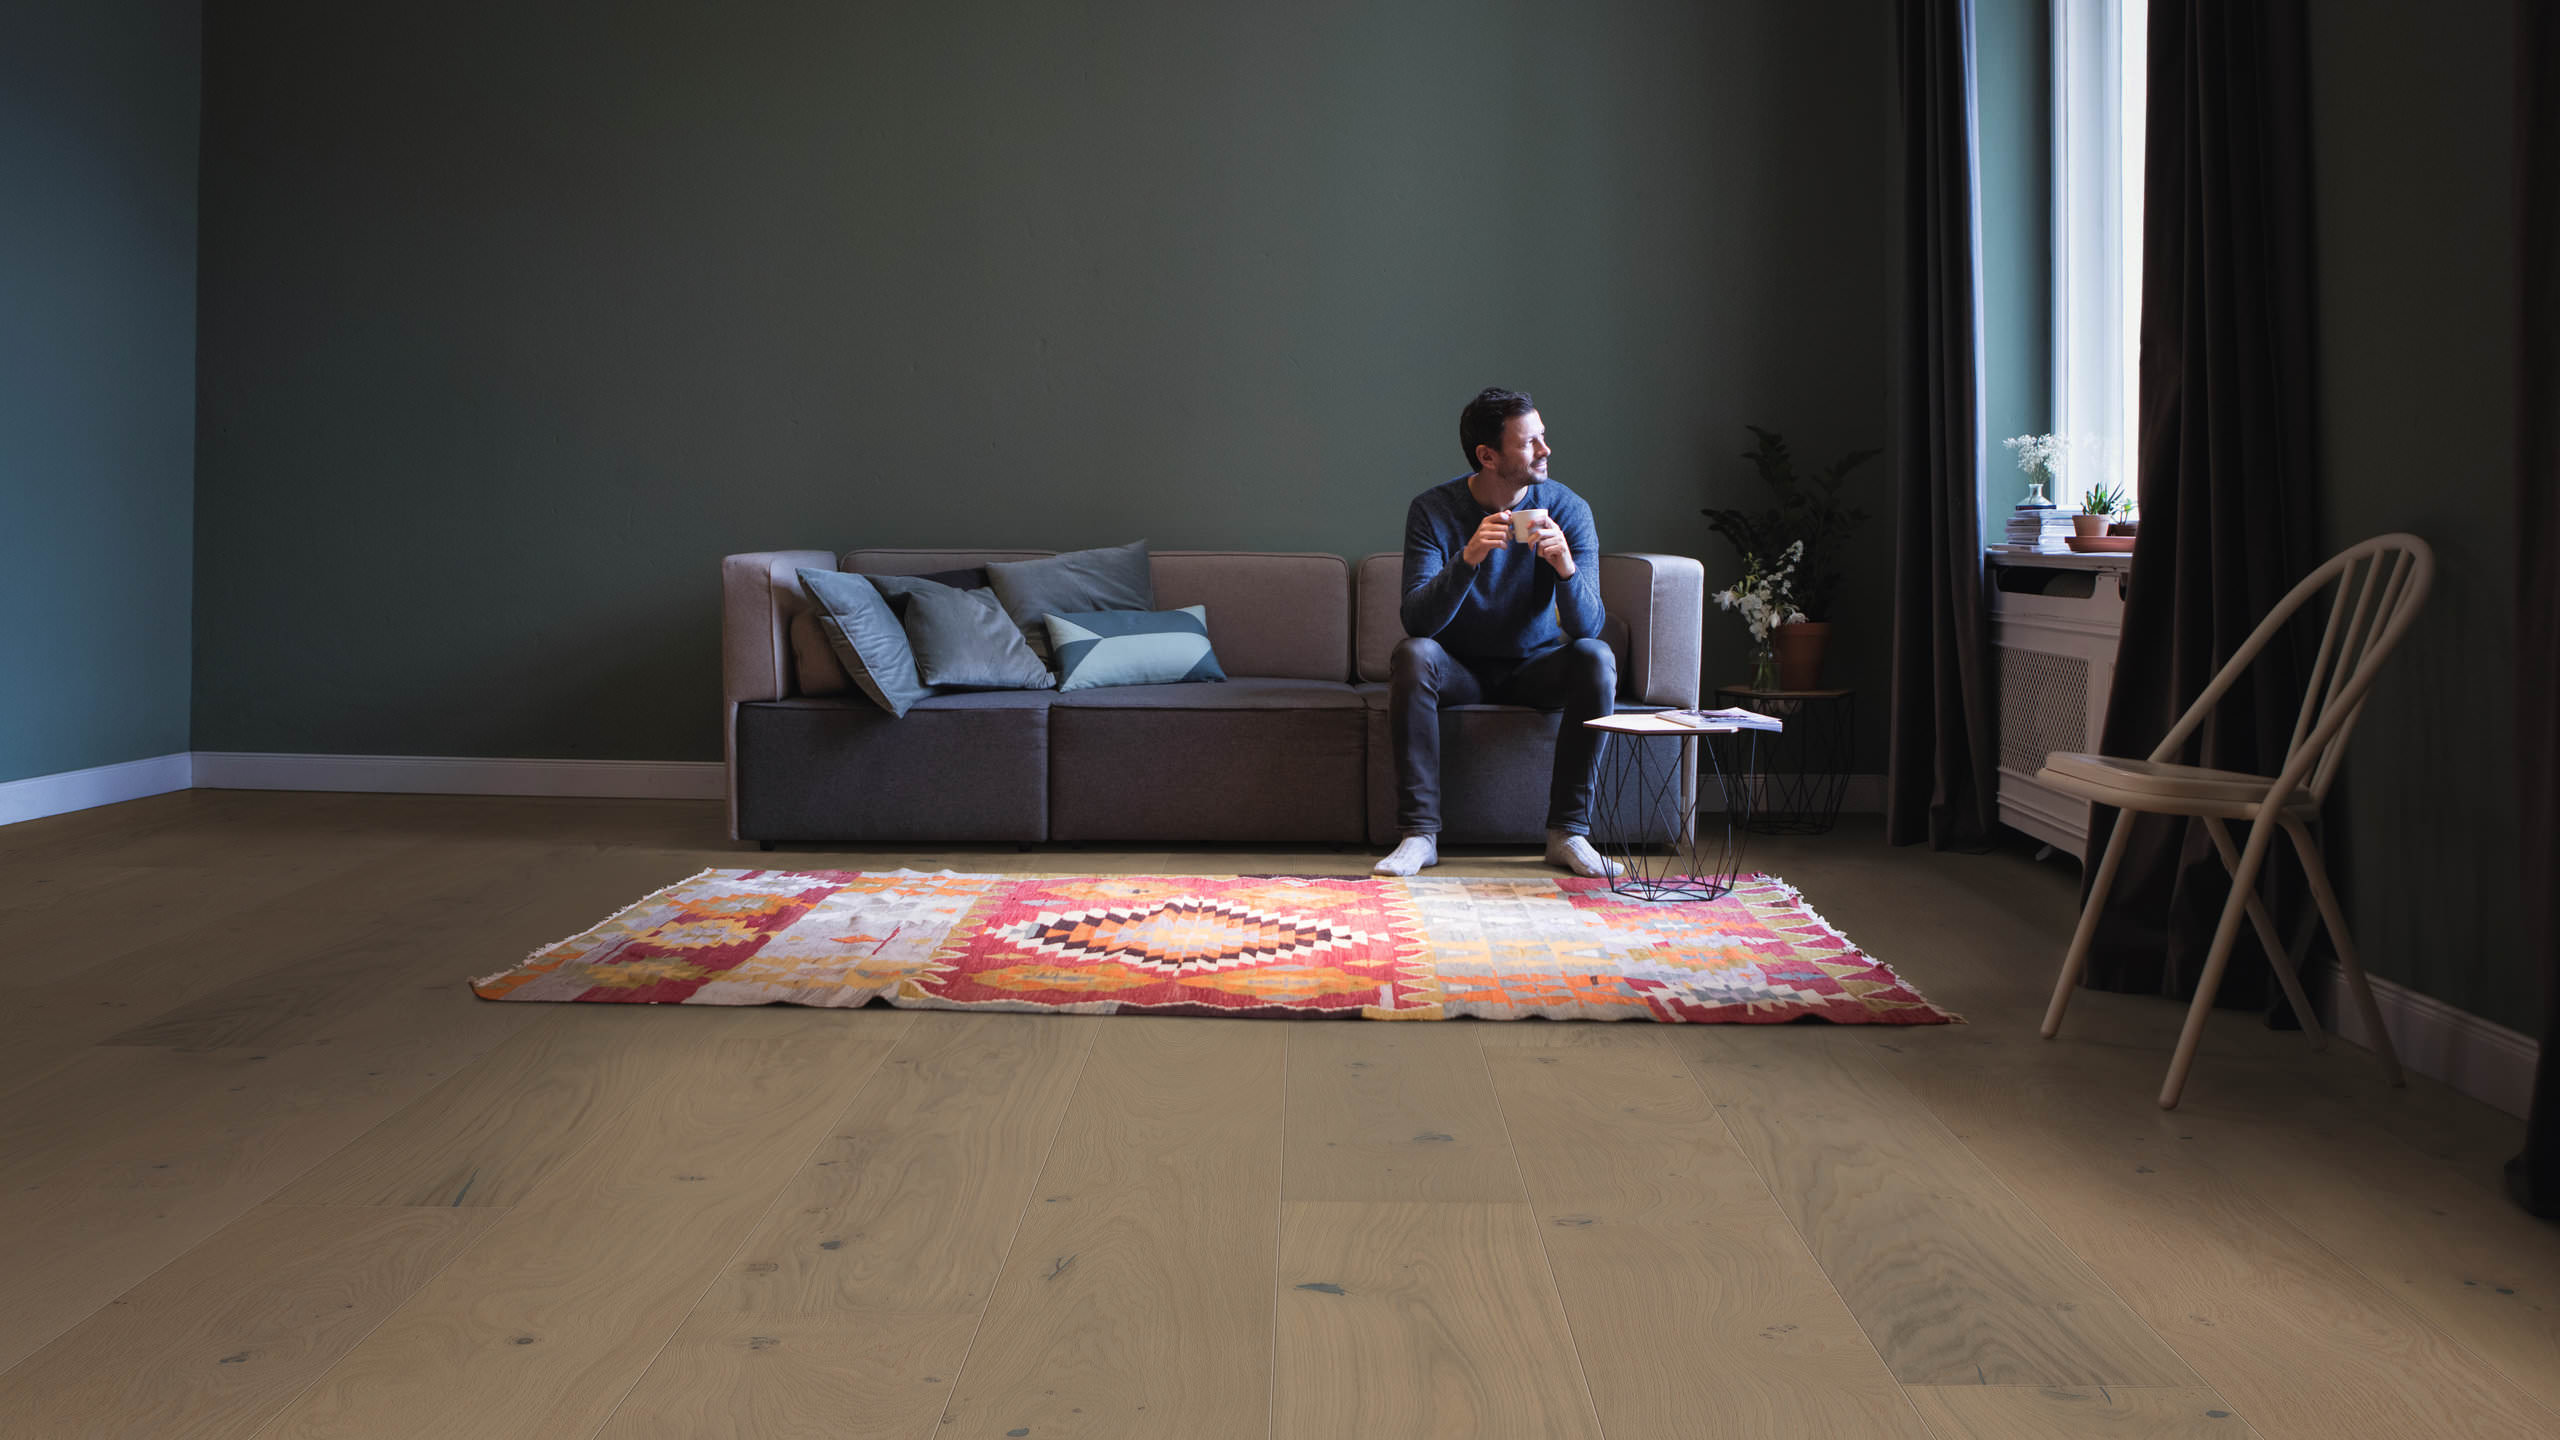 HARO PARQUET 4000 Plank 1-Strip Plaza 240 4V Oak Sand Grey Sauvage brushed naturaLin plus Top Connect